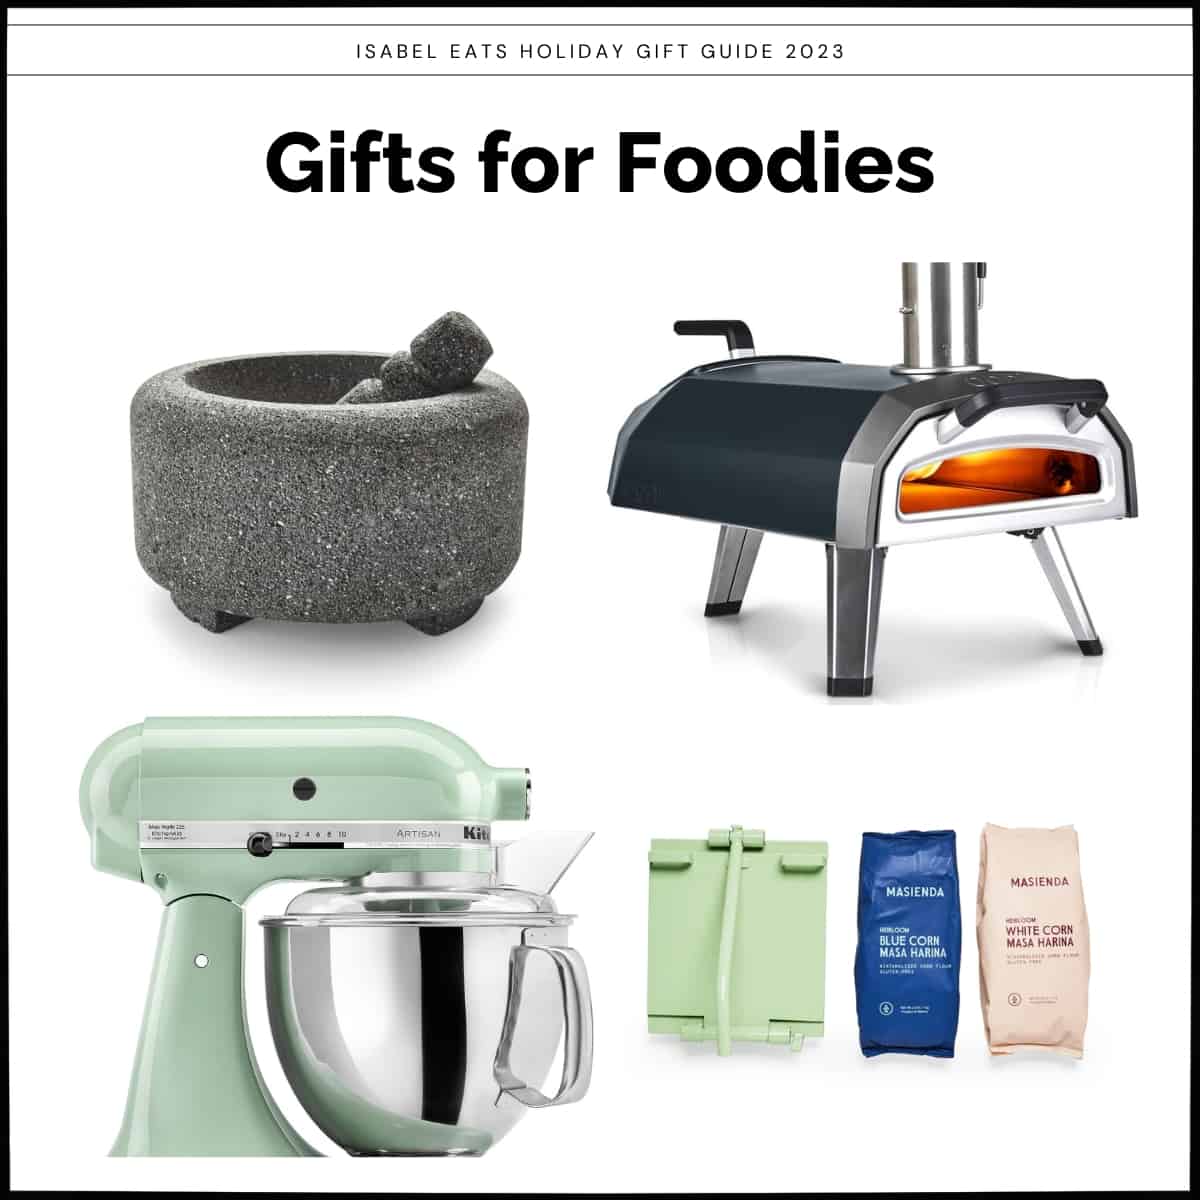 Gifts for Foodies collage